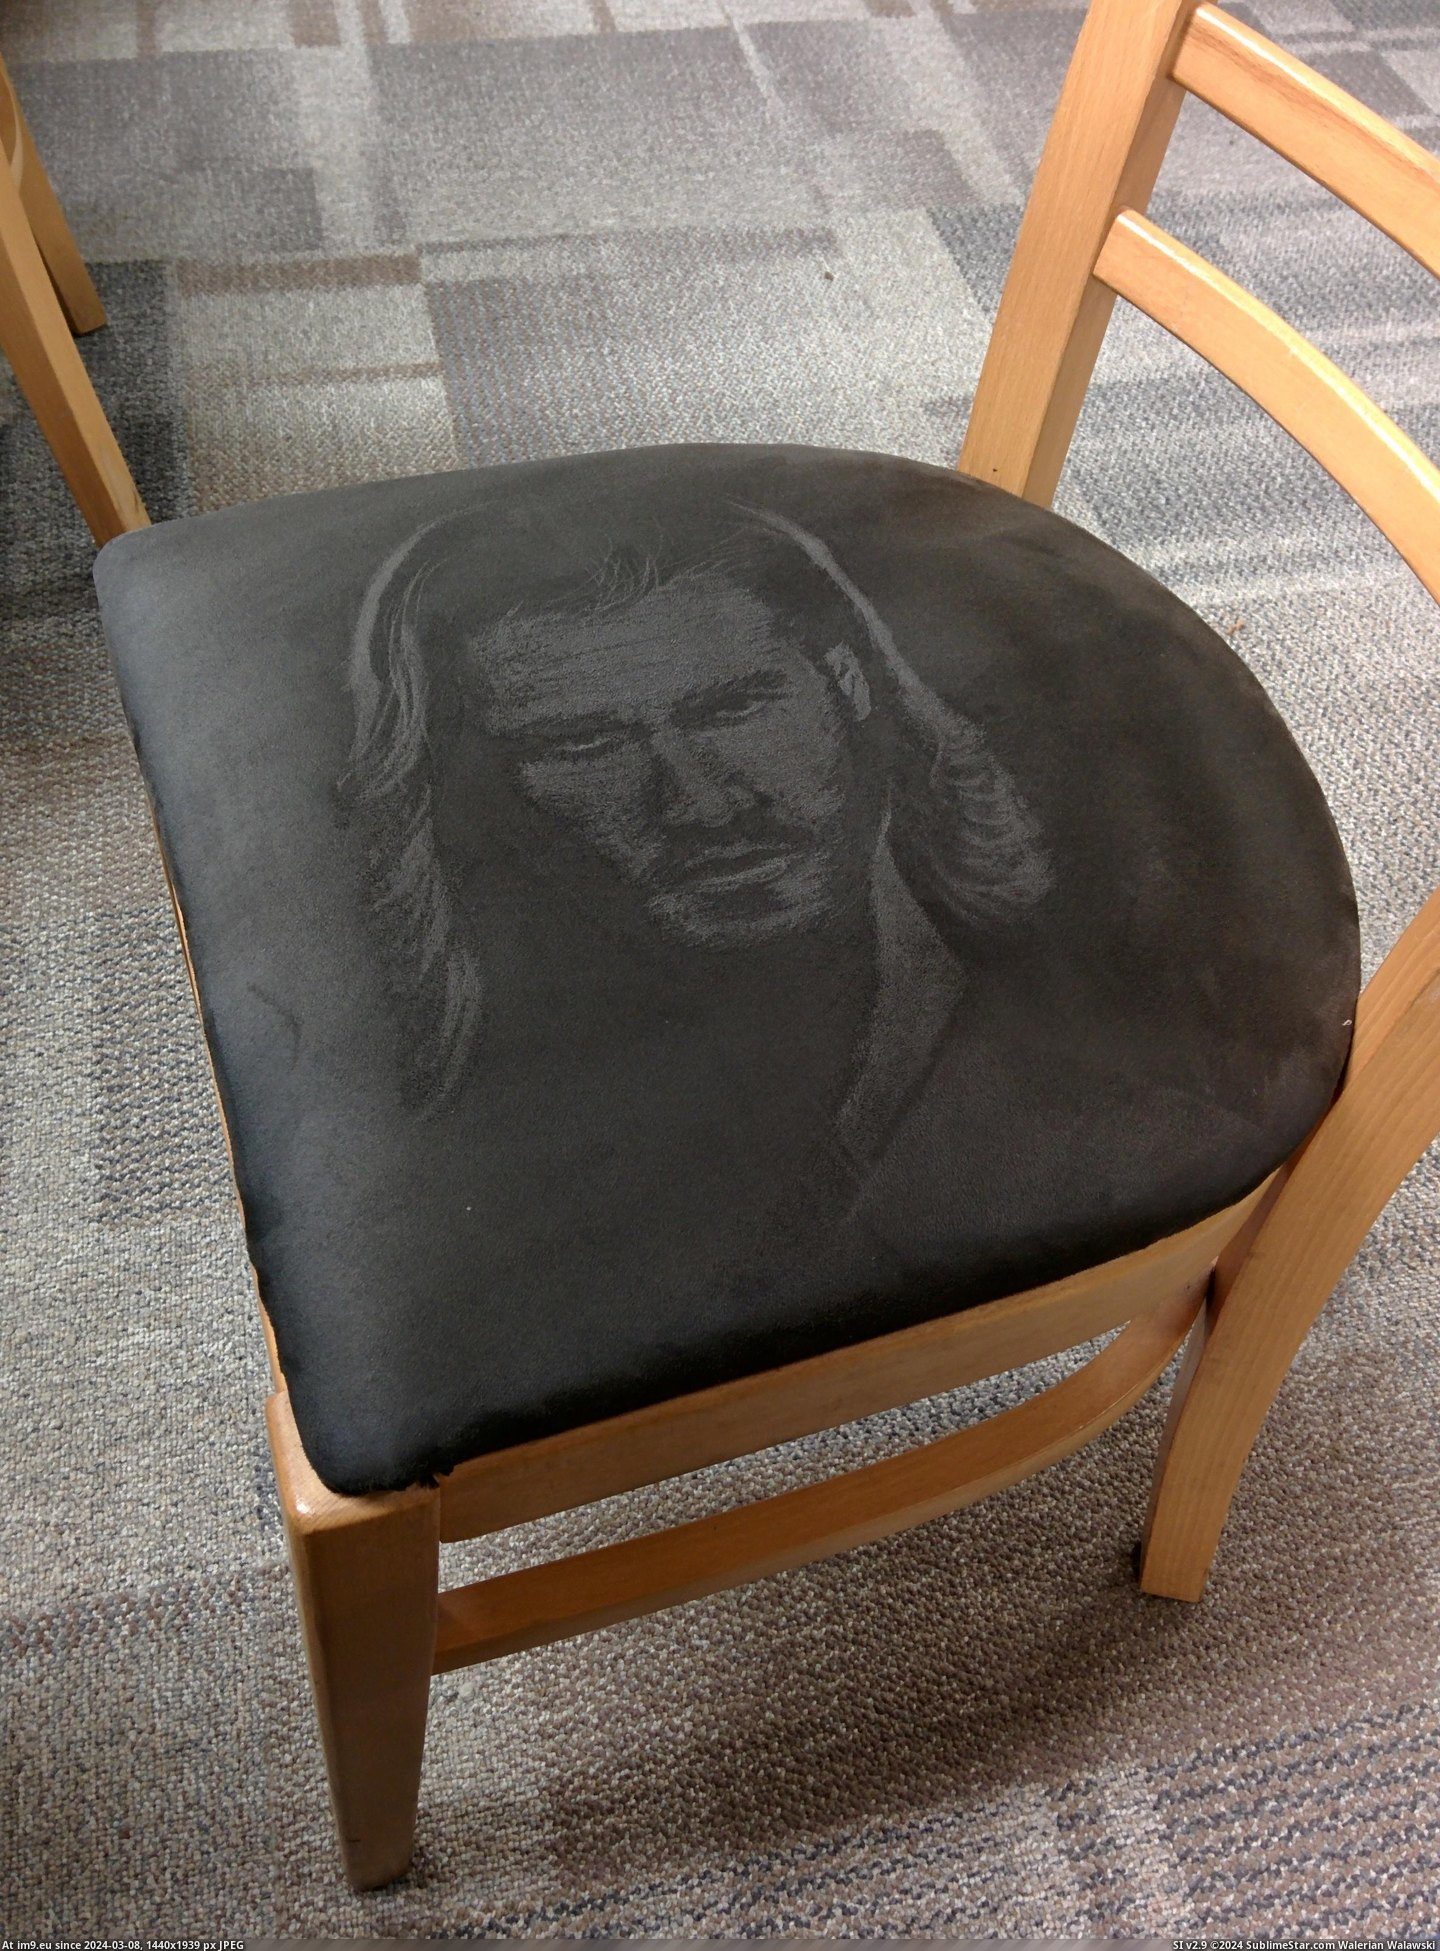 #Chair #Thor #Suede #Drew [Pics] Someone drew Thor on a suede chair Pic. (Obraz z album My r/PICS favs))